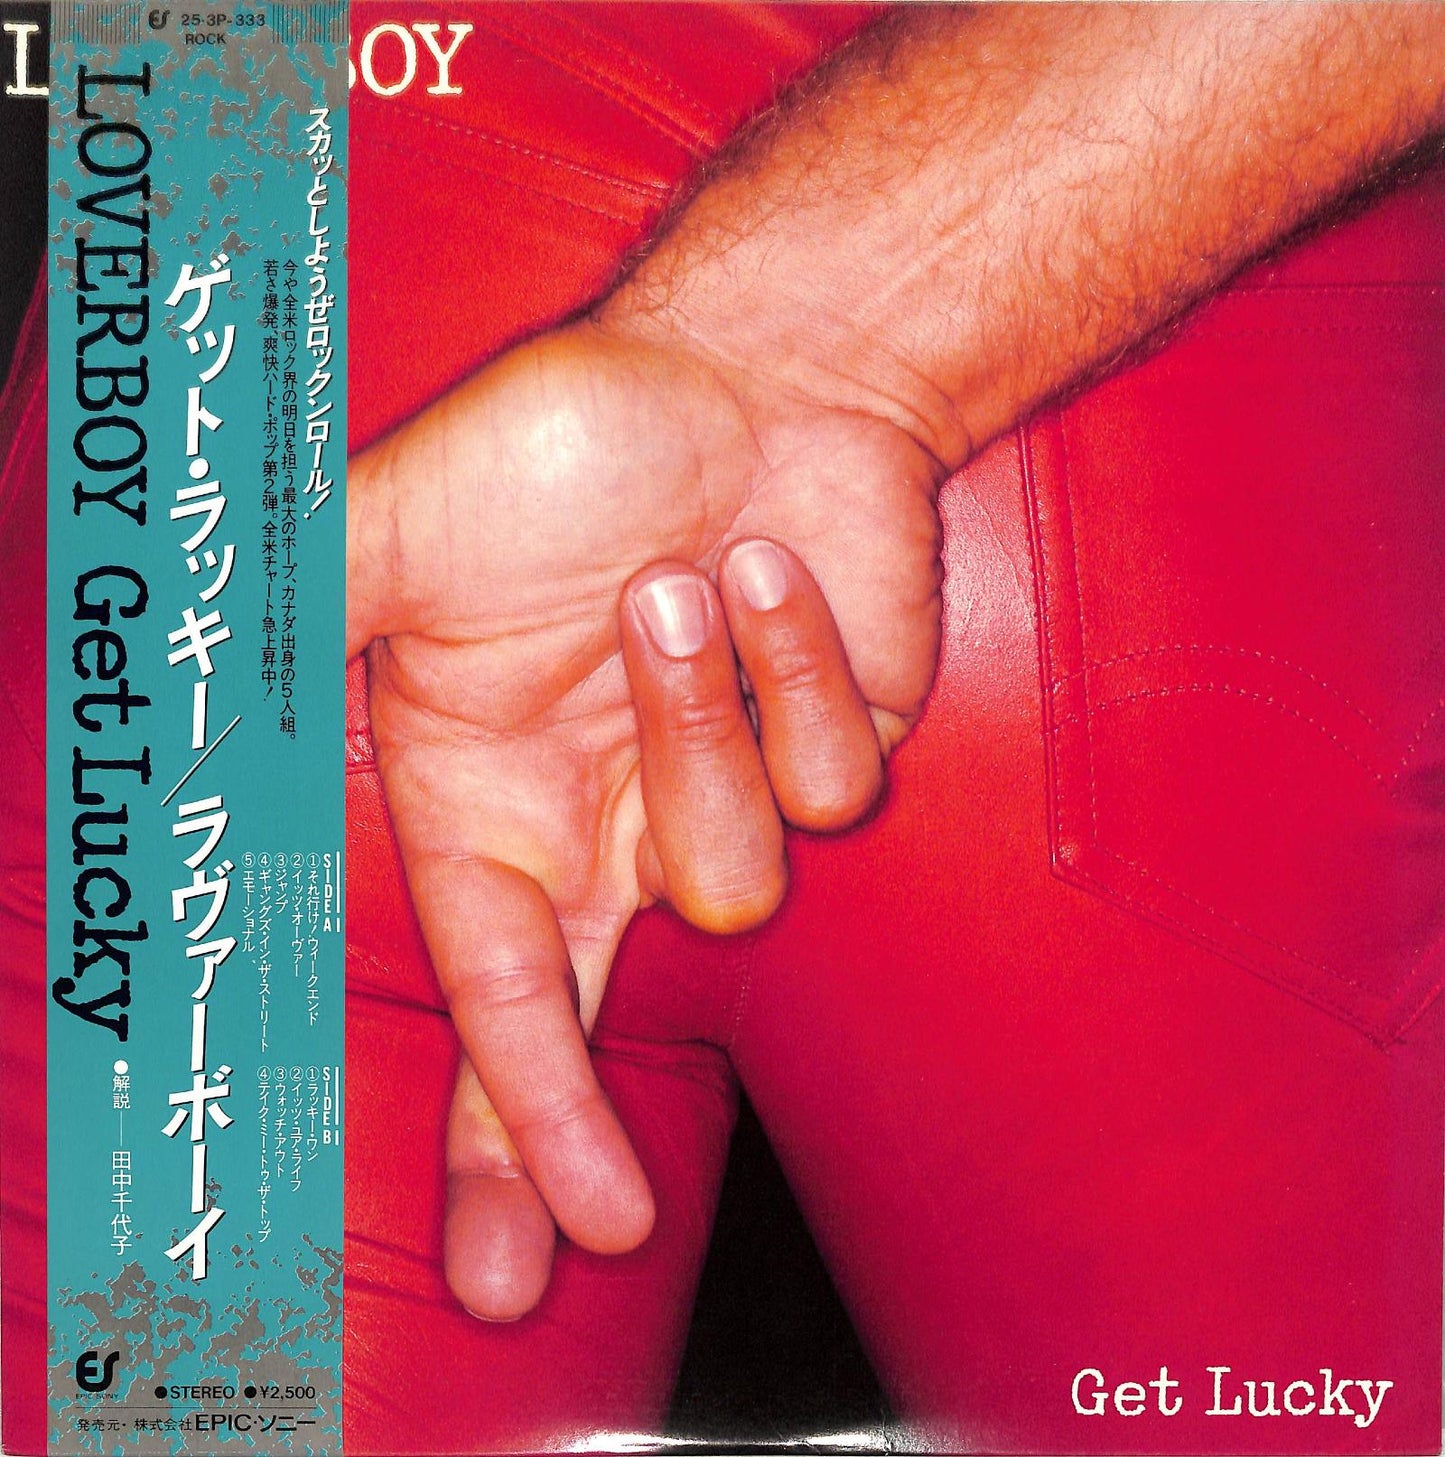 LOVERBOY - Get Lucky